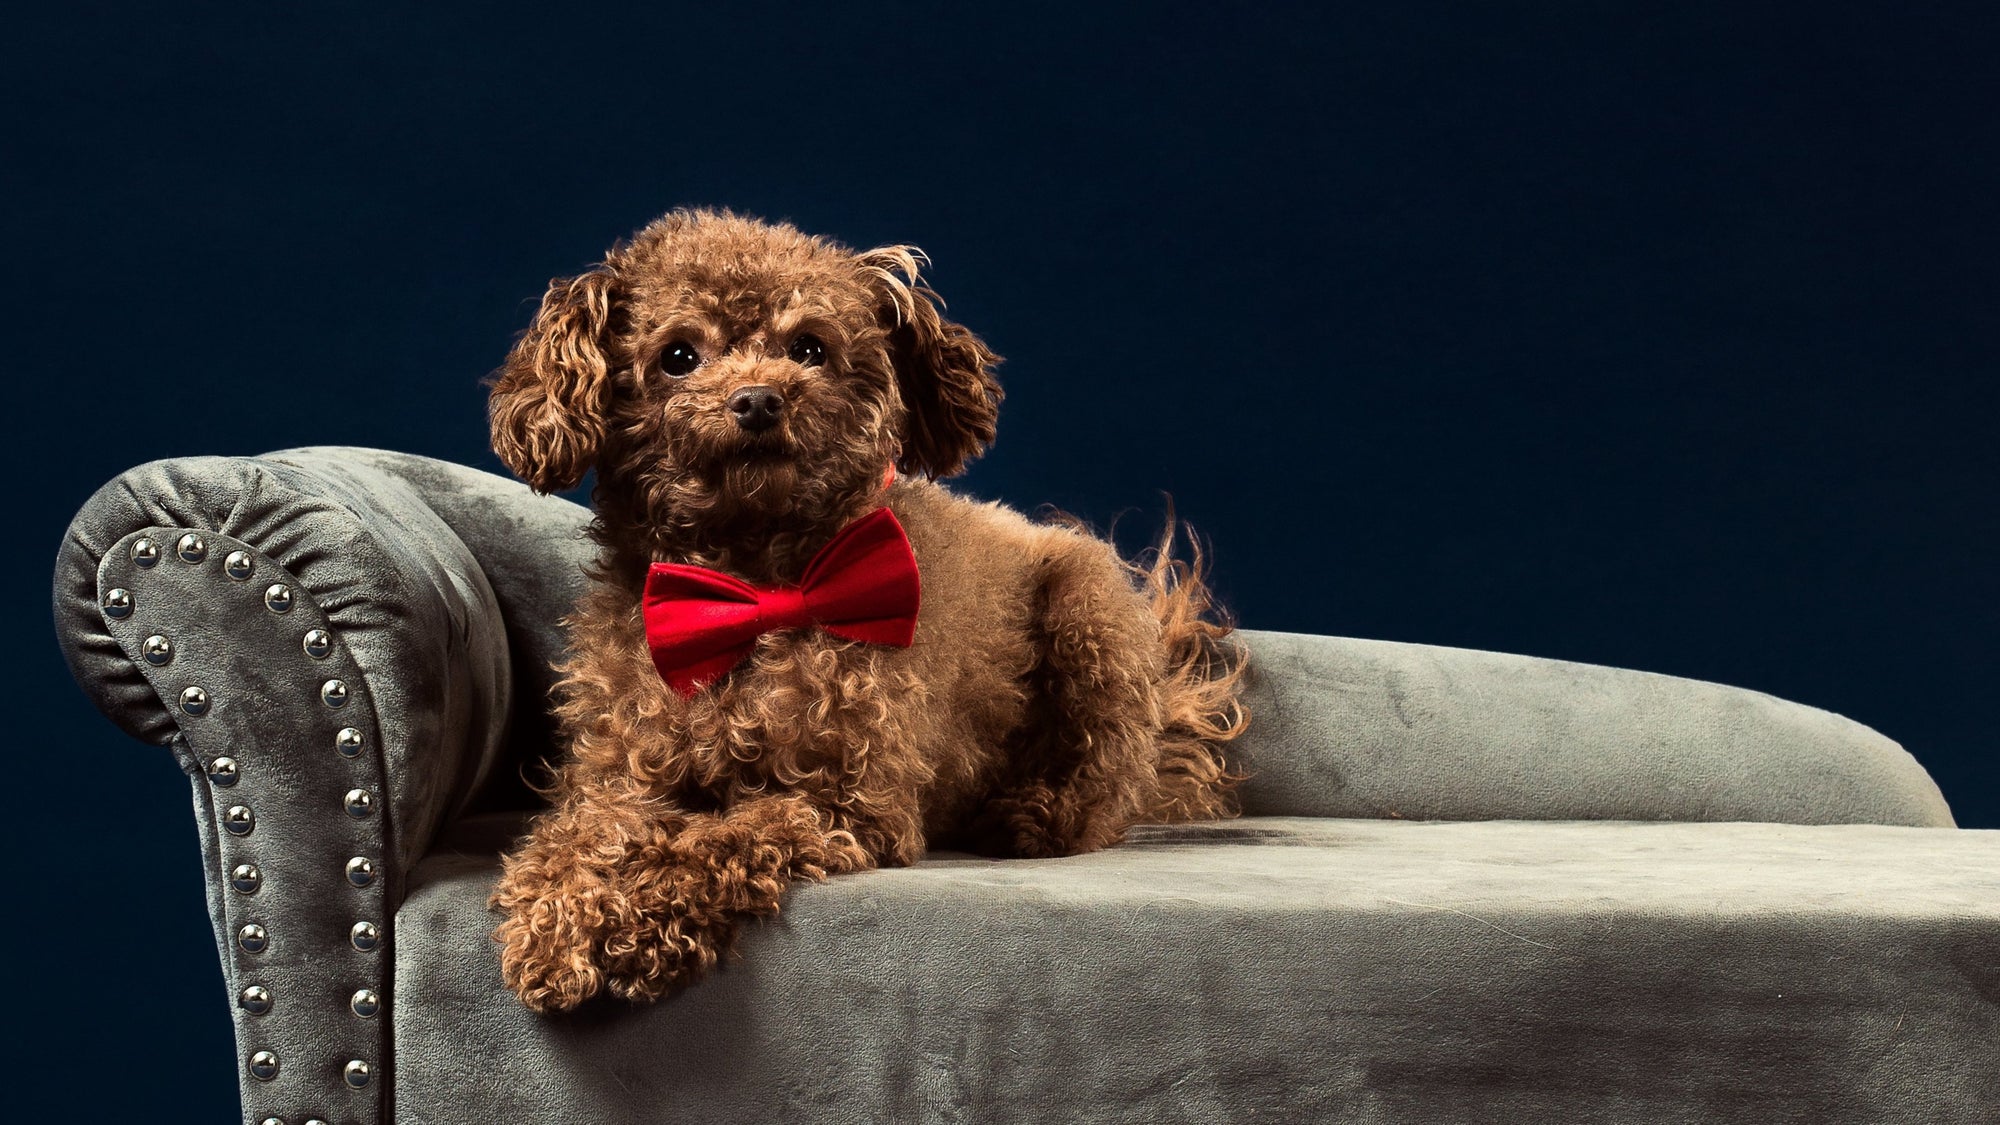 From dashing bow tie dog collars and harnesses to elegant personalized sets, Posh Dog Life's luxurious designs are bound to make your puppy the envy of the neighborhood.